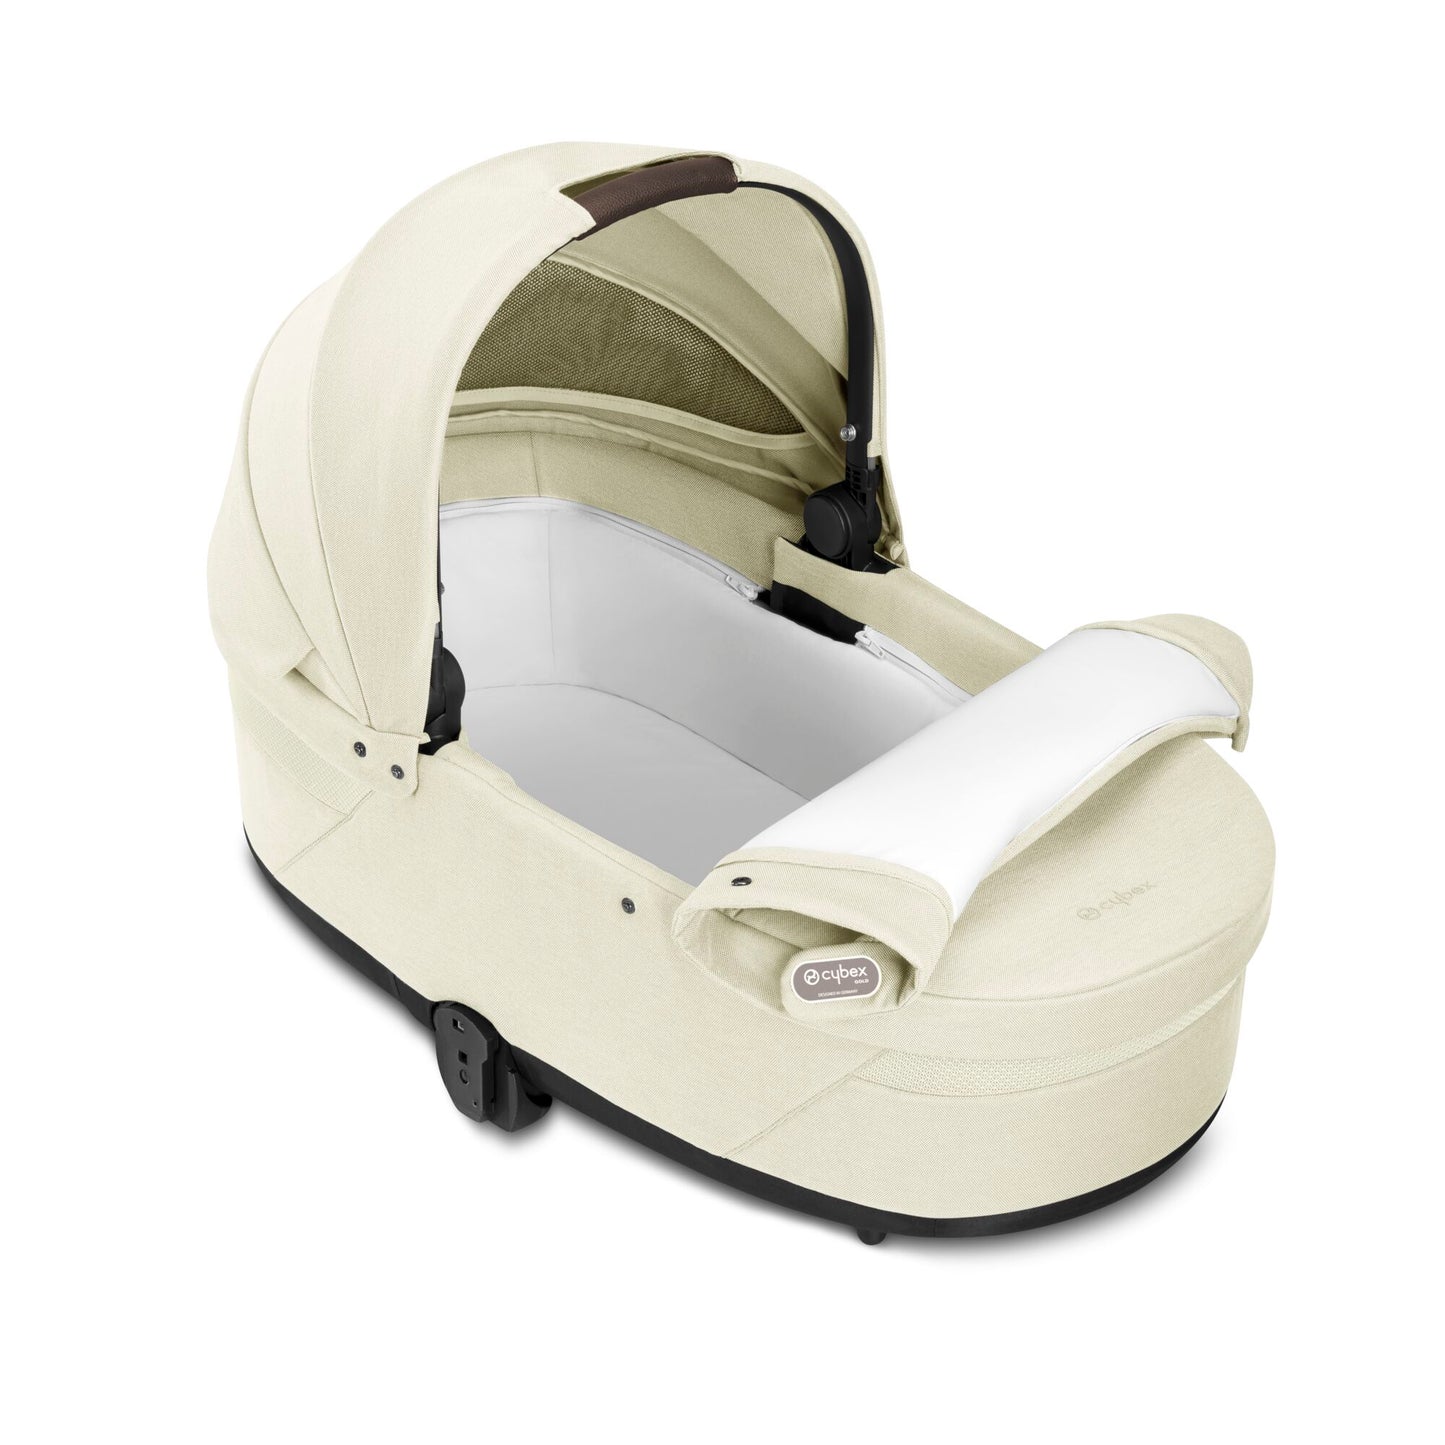 Nacelle cot s lux | Seashell beige